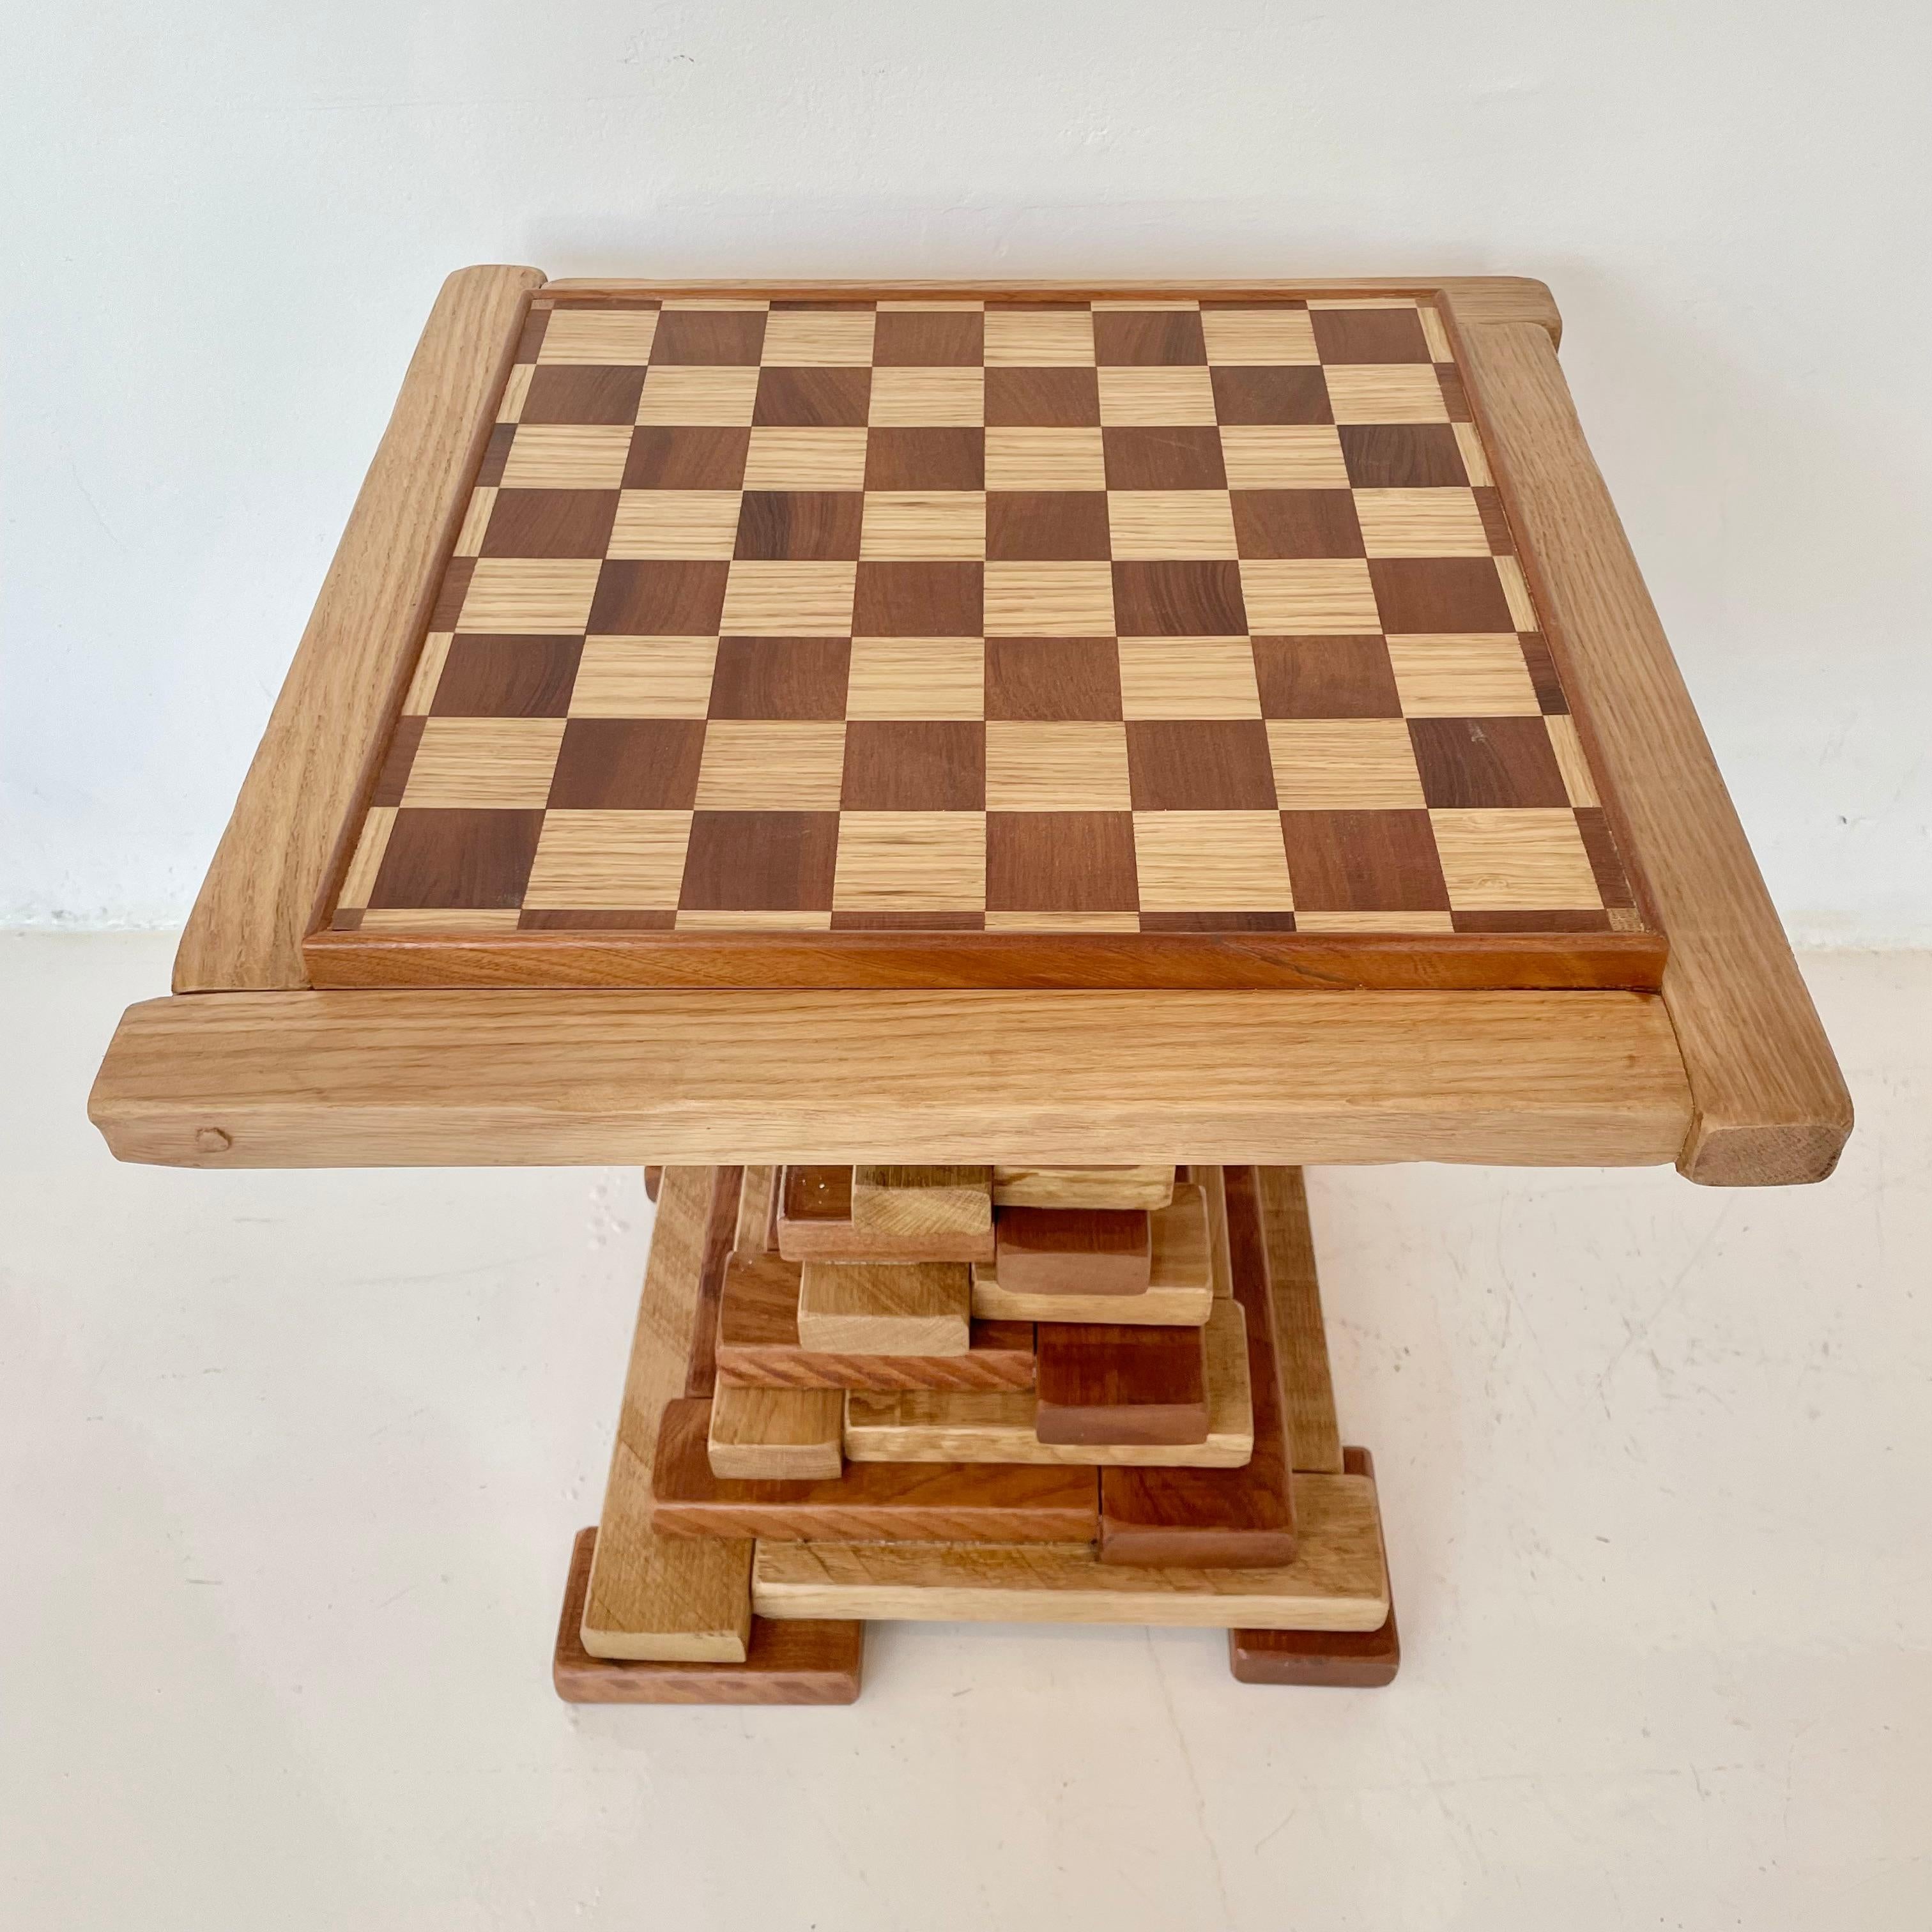 Stunning sculptural handmade chess table made from wood blocks. Gorgeous coloring and design. Tan and brown alternating wood blocks give this piece great texture while it's hourglass shape gives it nice depth. Perfect game table. Table top can be